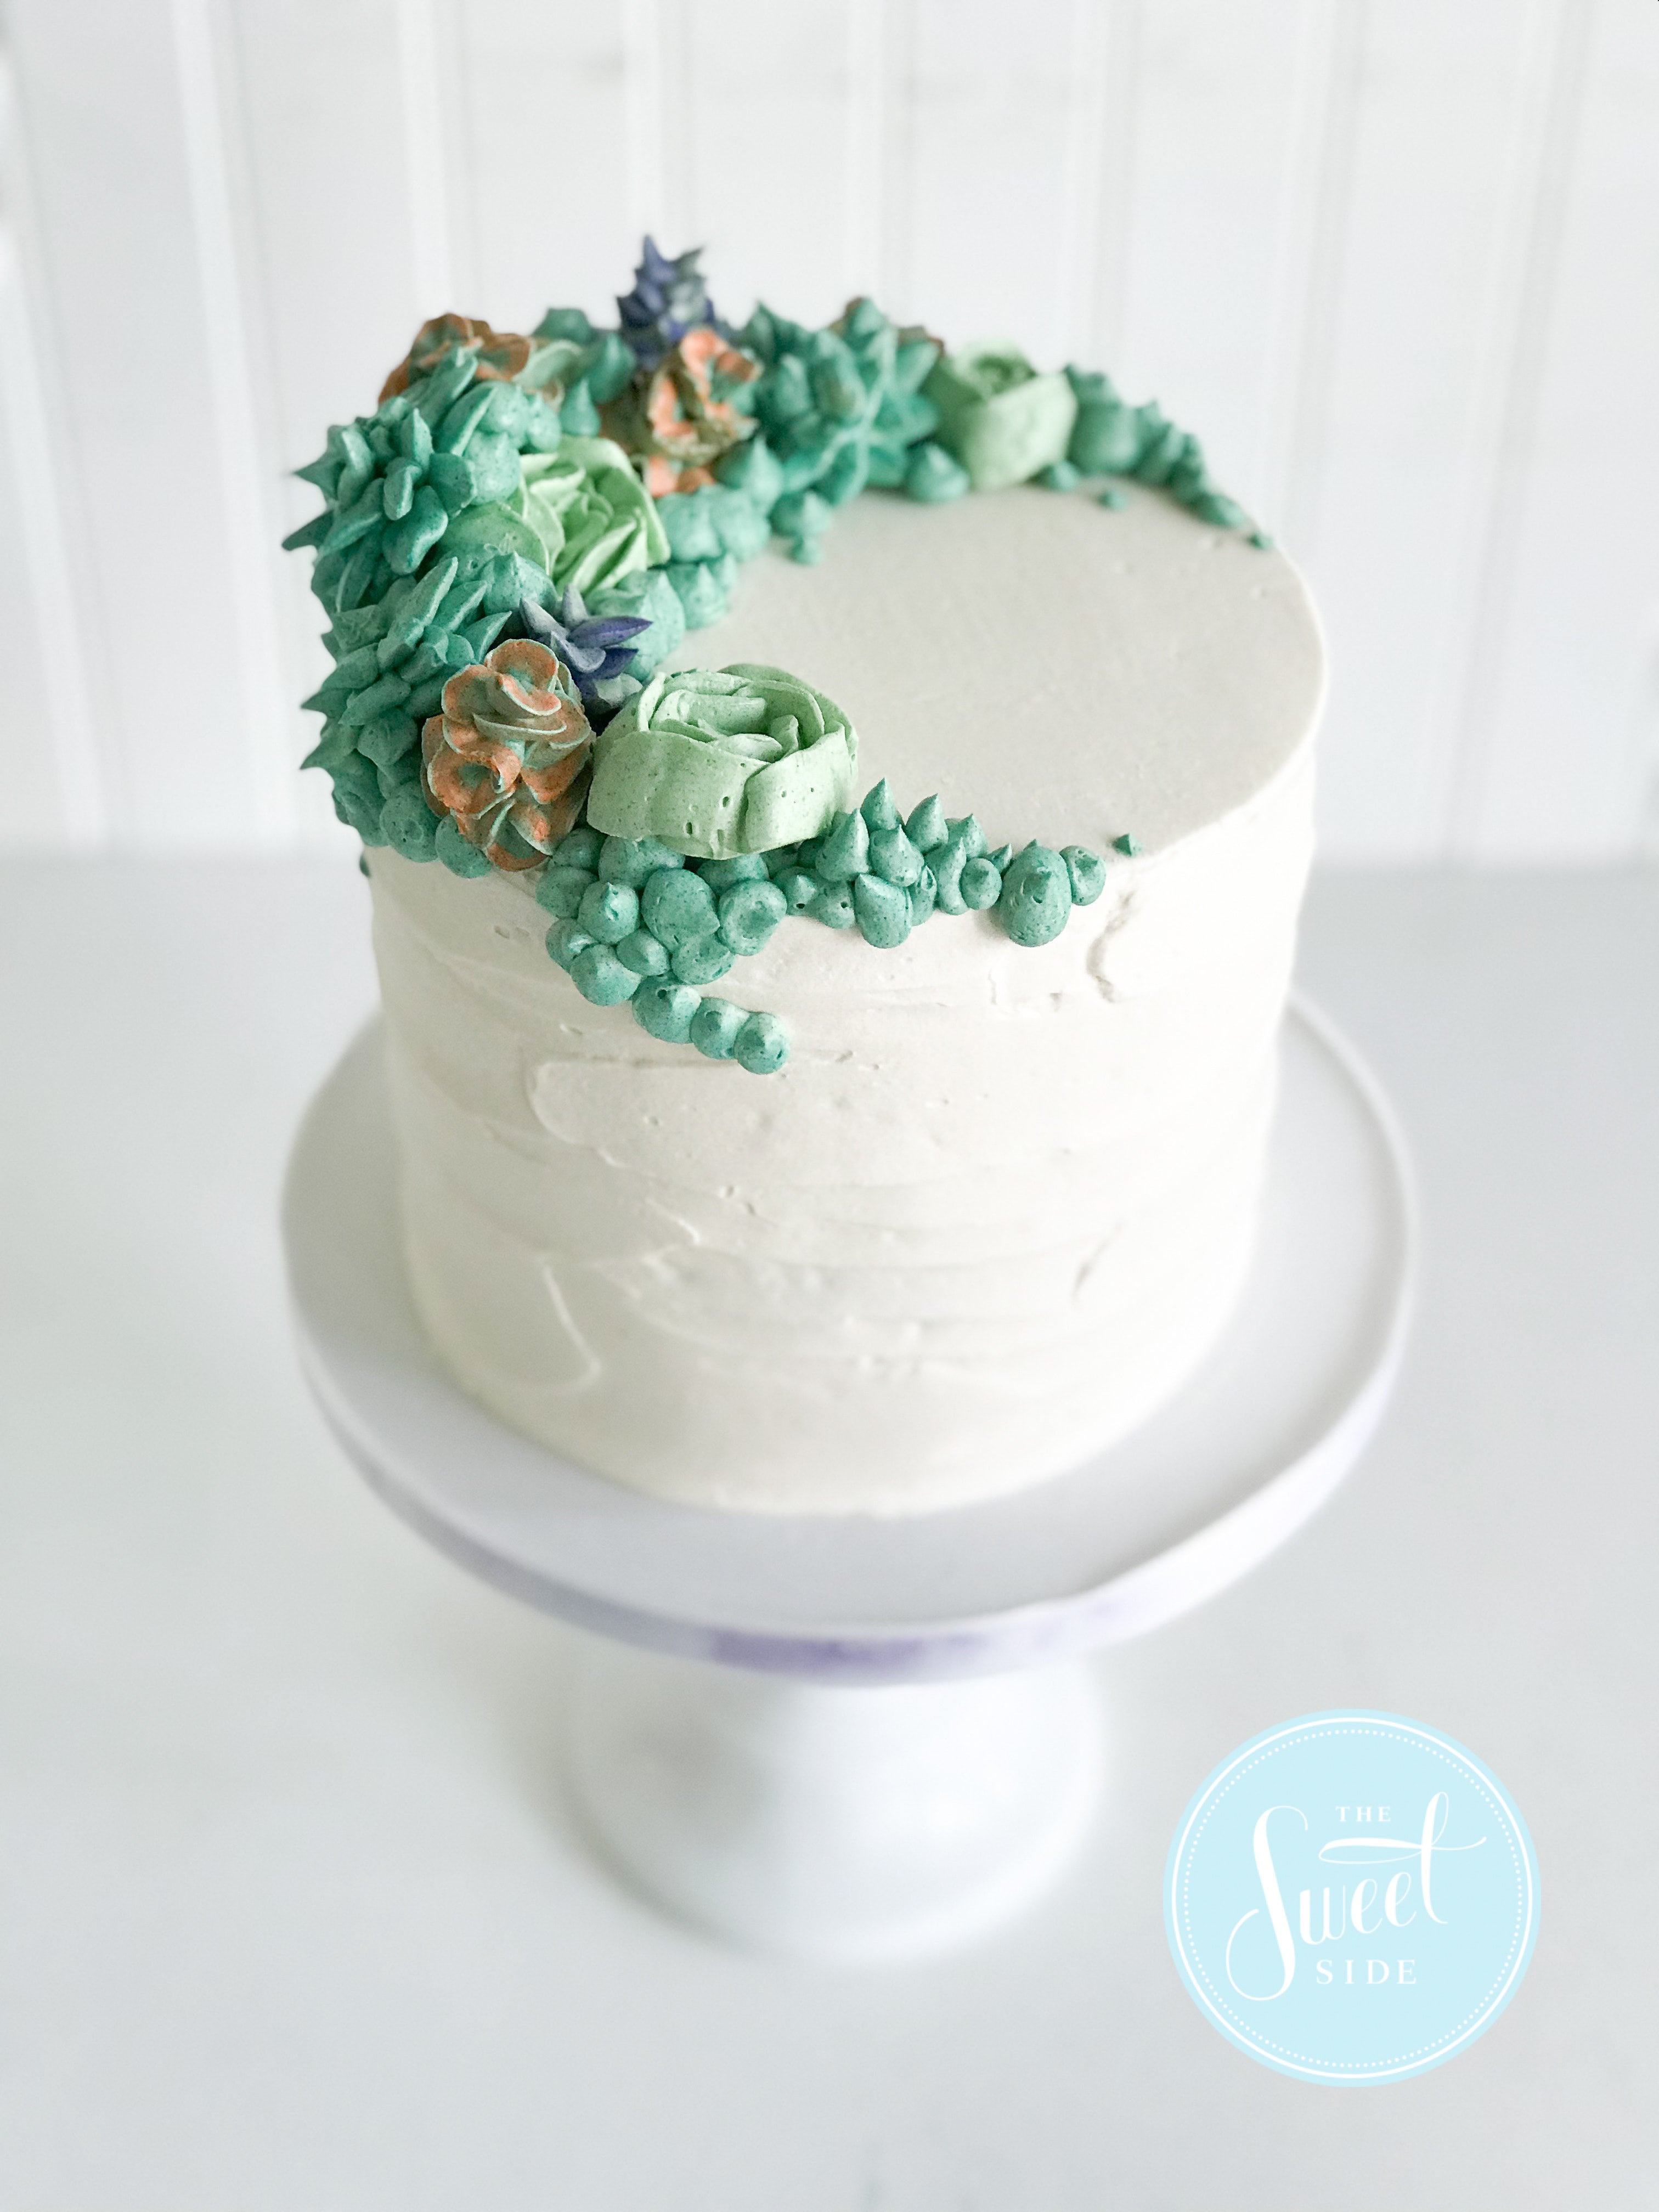 Trefzger's Decorated Cake with Piped Succulents — Trefzger's Bakery